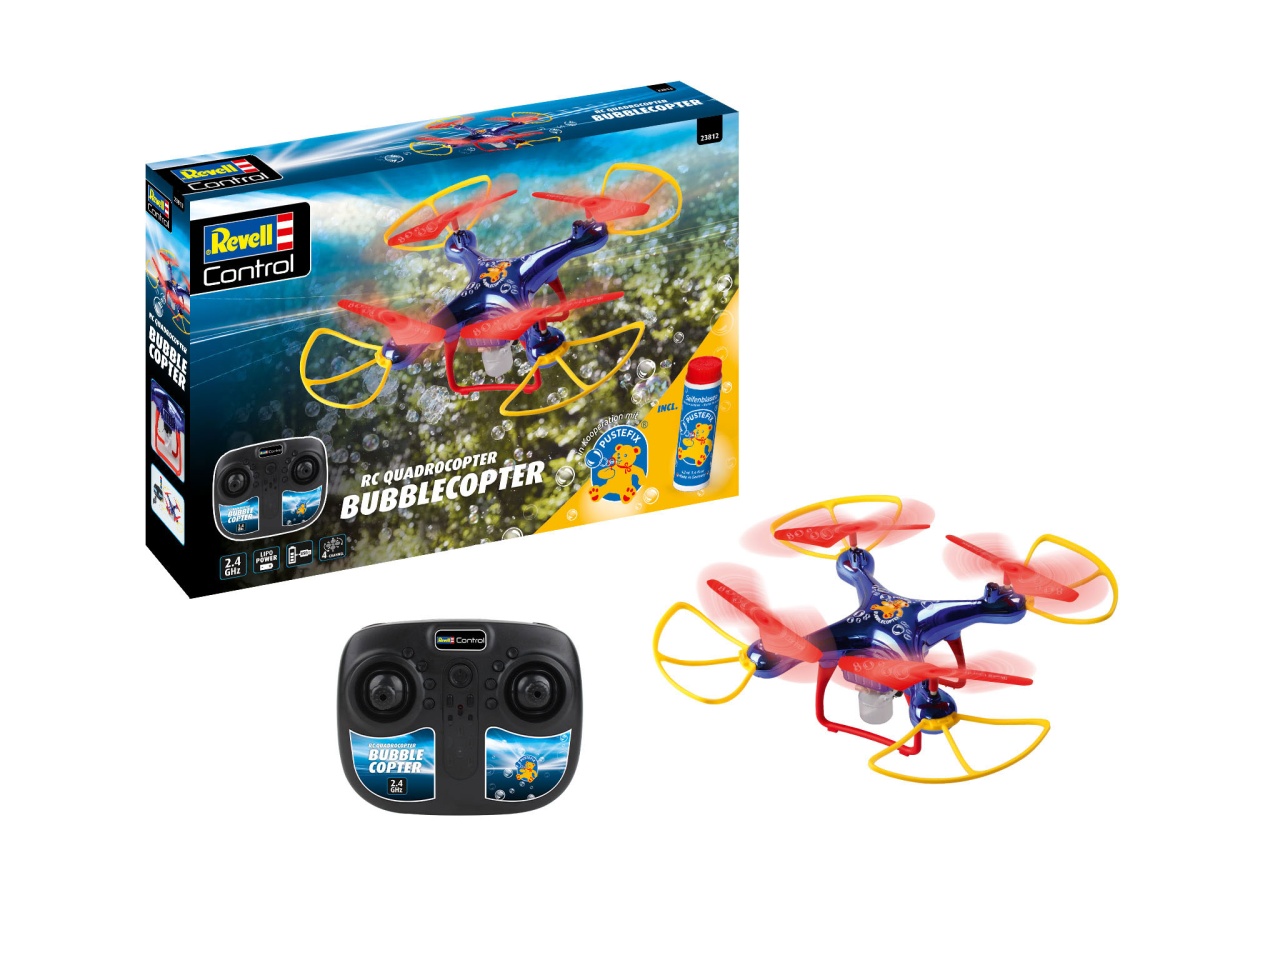 Revell 23812 RC Quadrocopter Bubblecopter